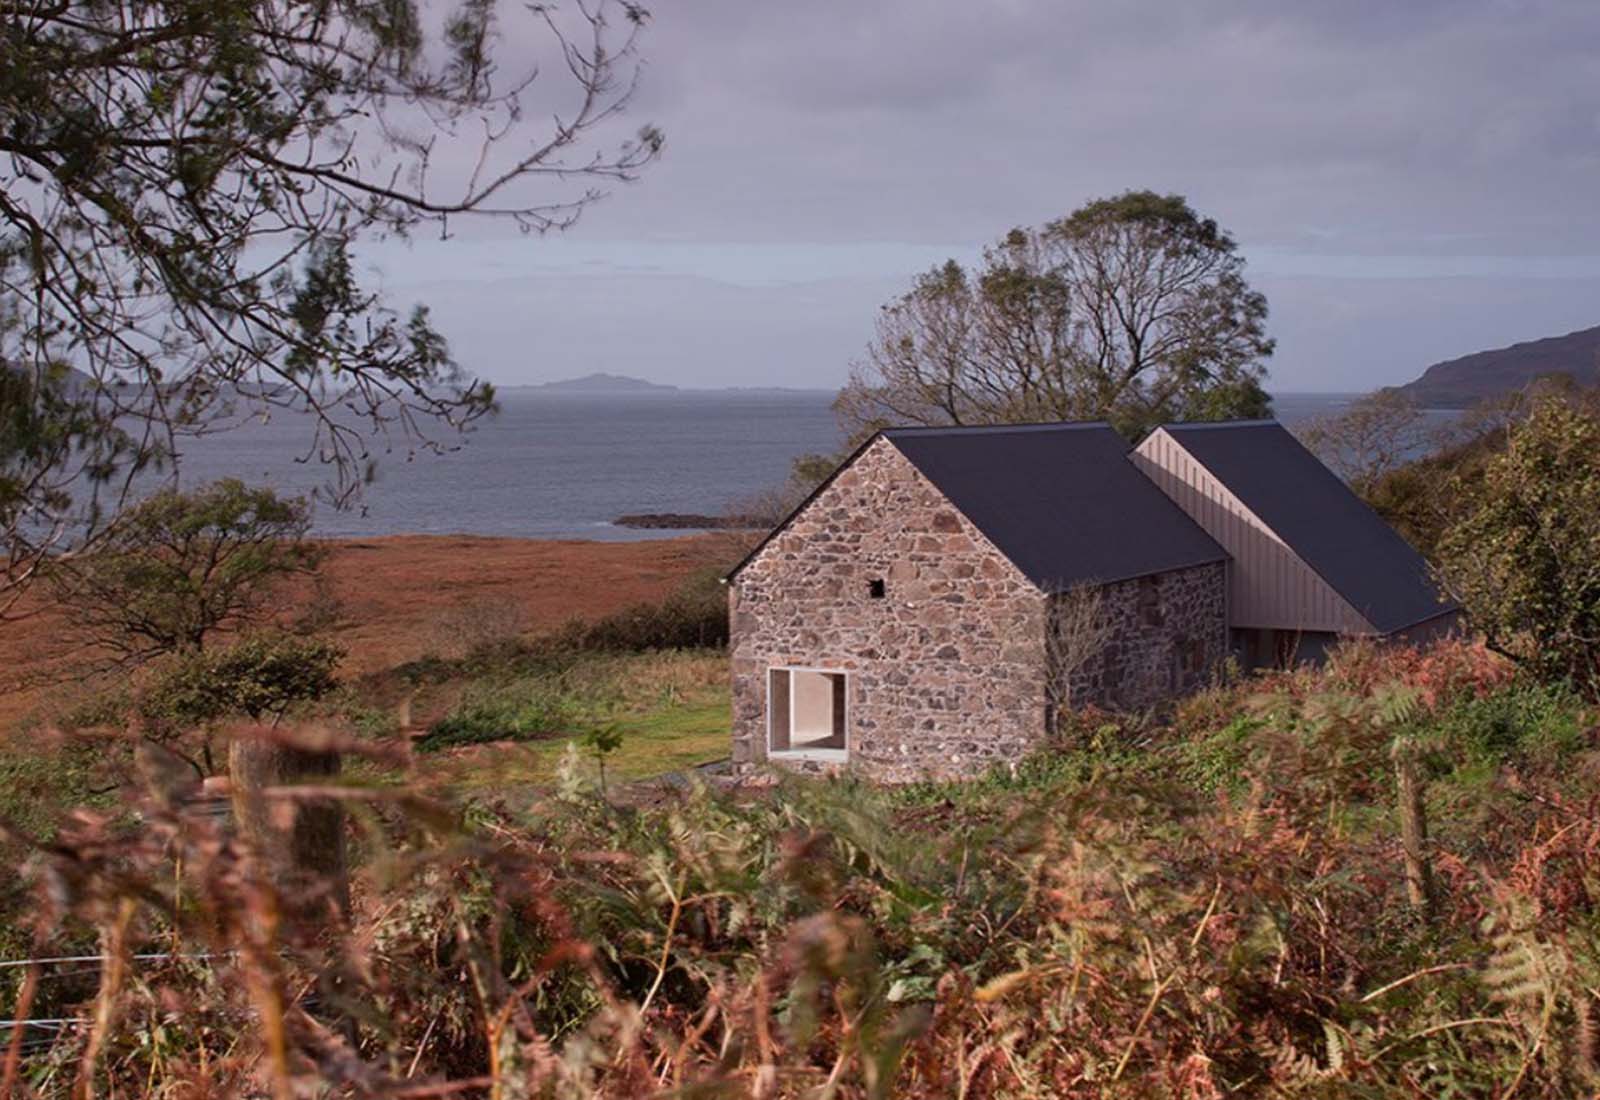 At home: Croft 3, the Isle of Mull